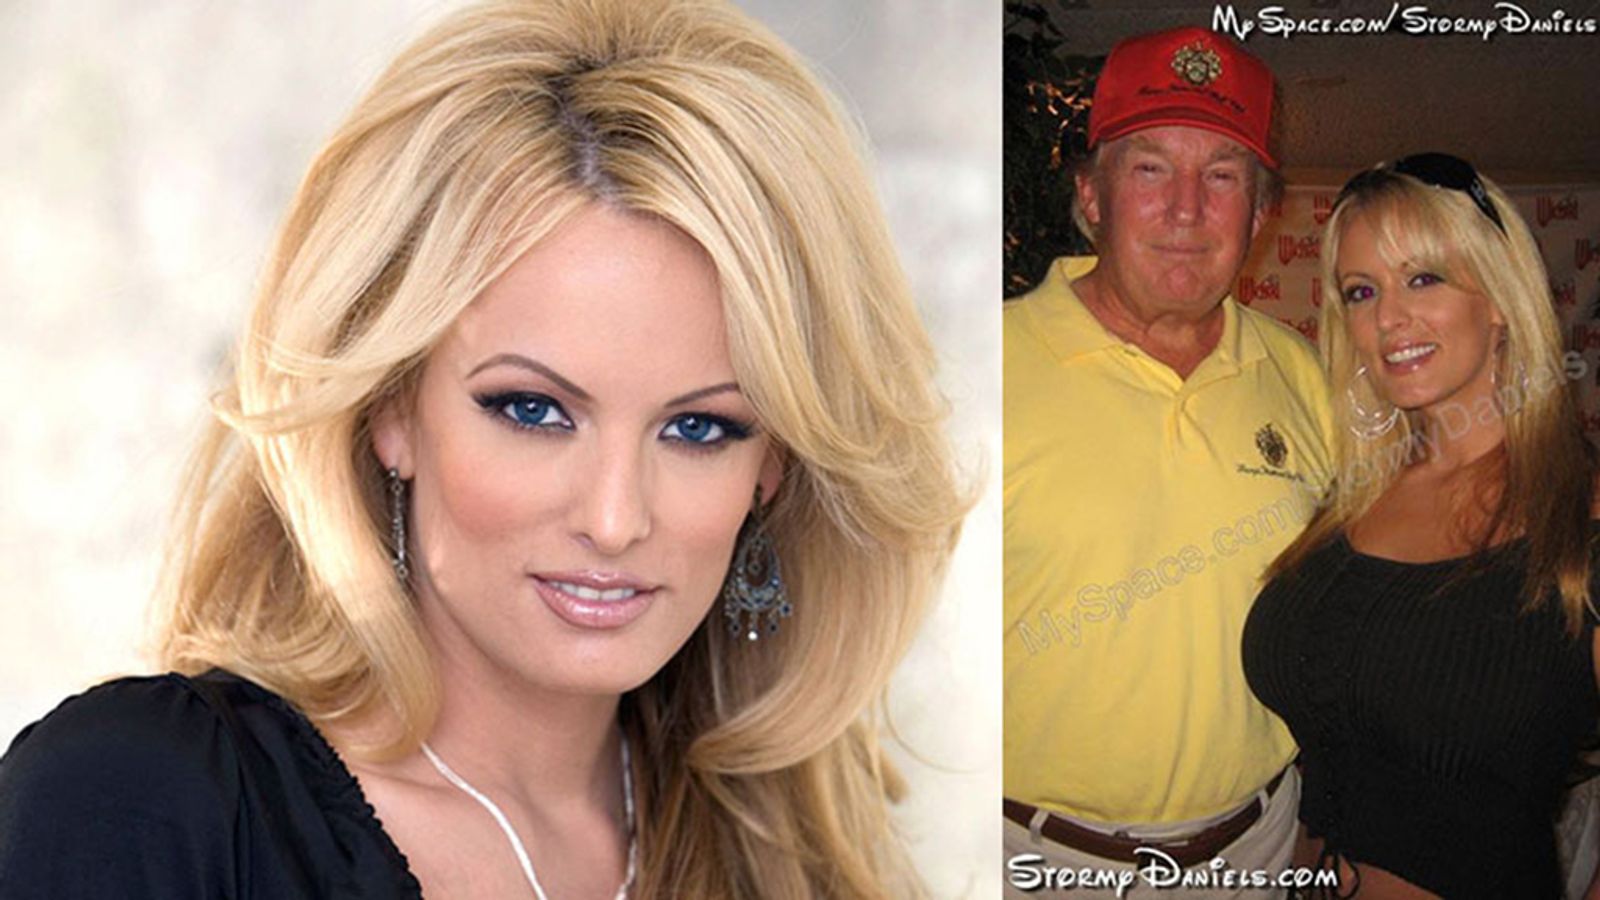 Report: Stormy Daniels Spanked Trump With Forbes Magazine